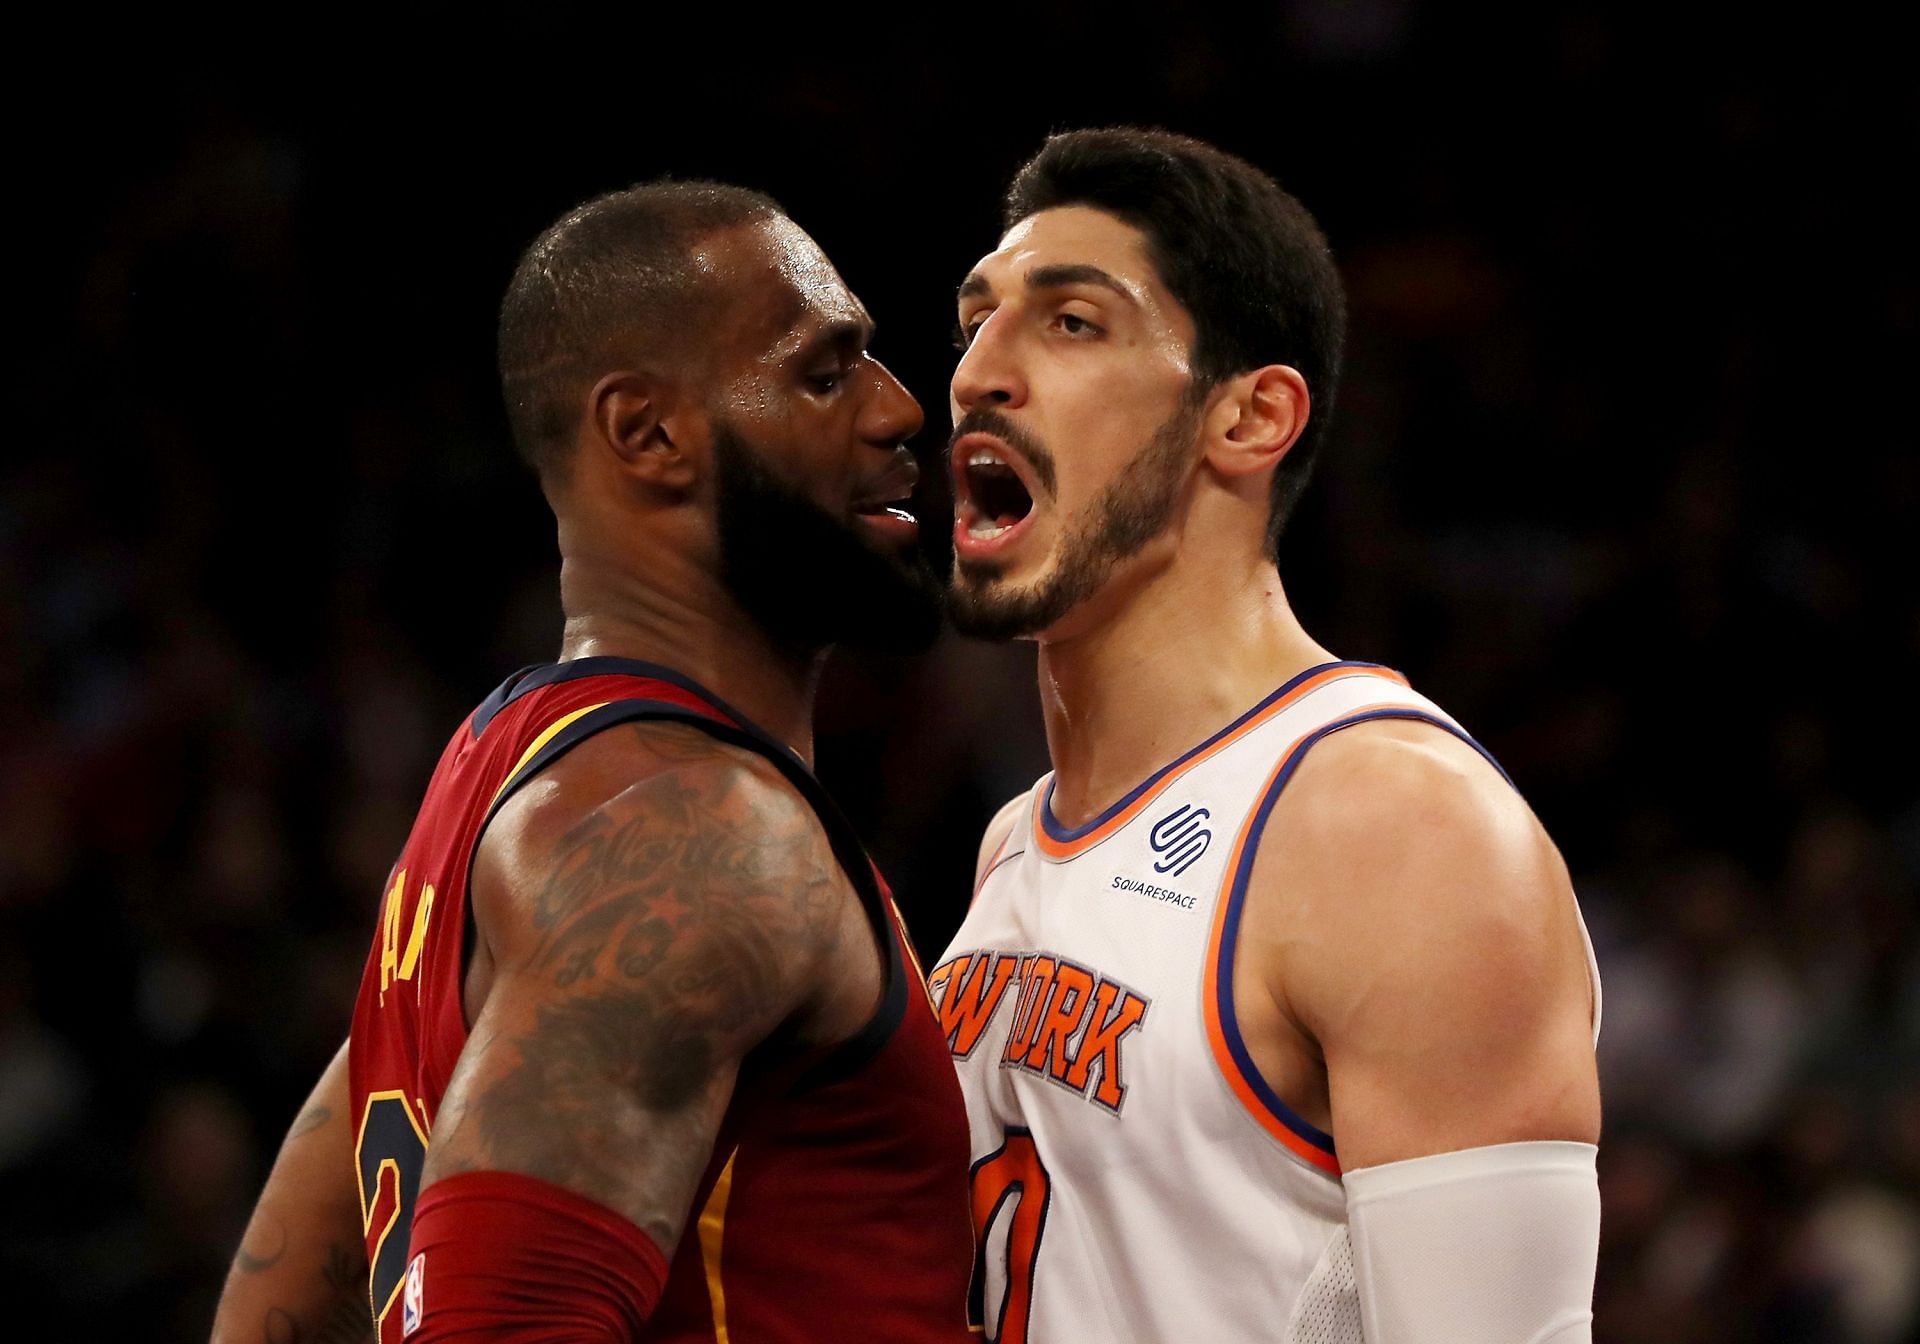 LeBron James and Enes Kanter Freedom (right)